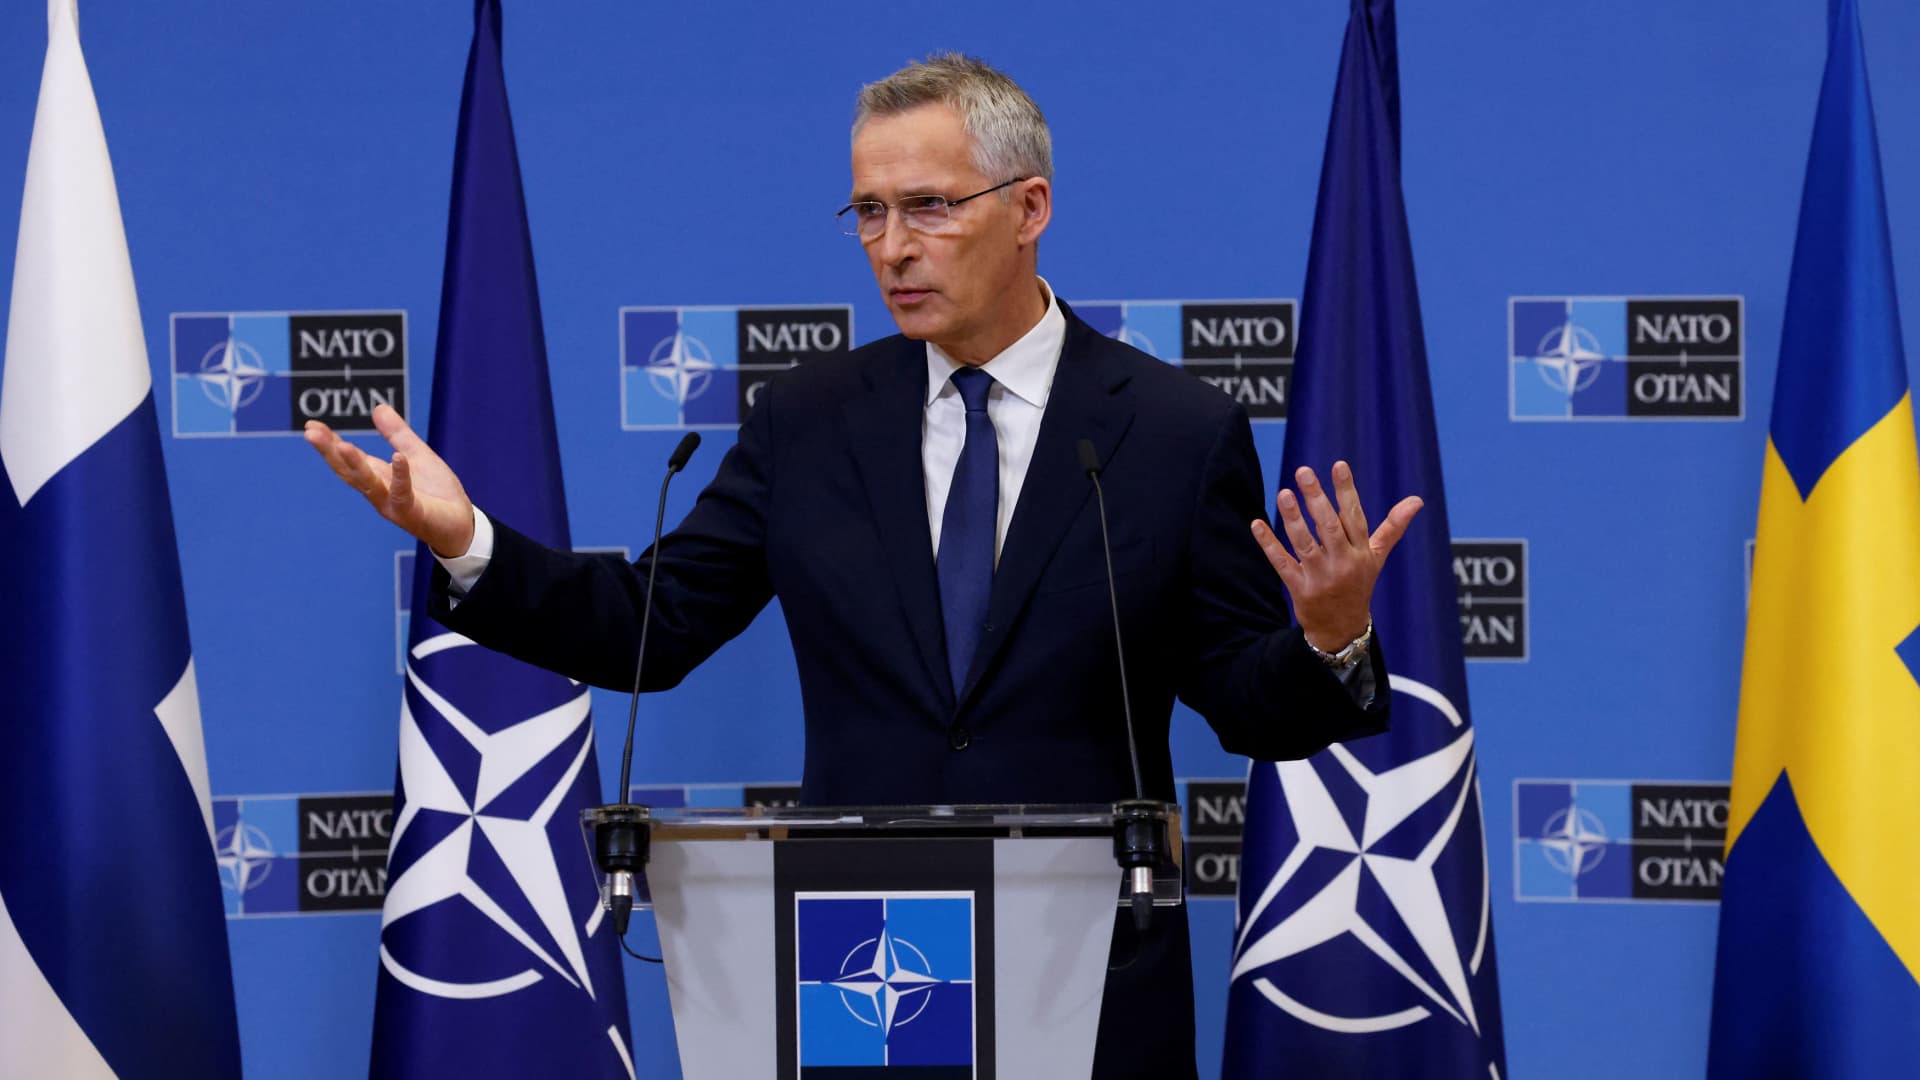 NATO Secretary-General Jens Stoltenberg at a news conference with Finland's Foreign Minister Pekka Haavisto and Sweden's Foreign Minister Ann Linde, after Finland and Sweden signed their countries' accession protocols at the alliance's headquarters in Brussels, Belgium, on July 5, 2022.